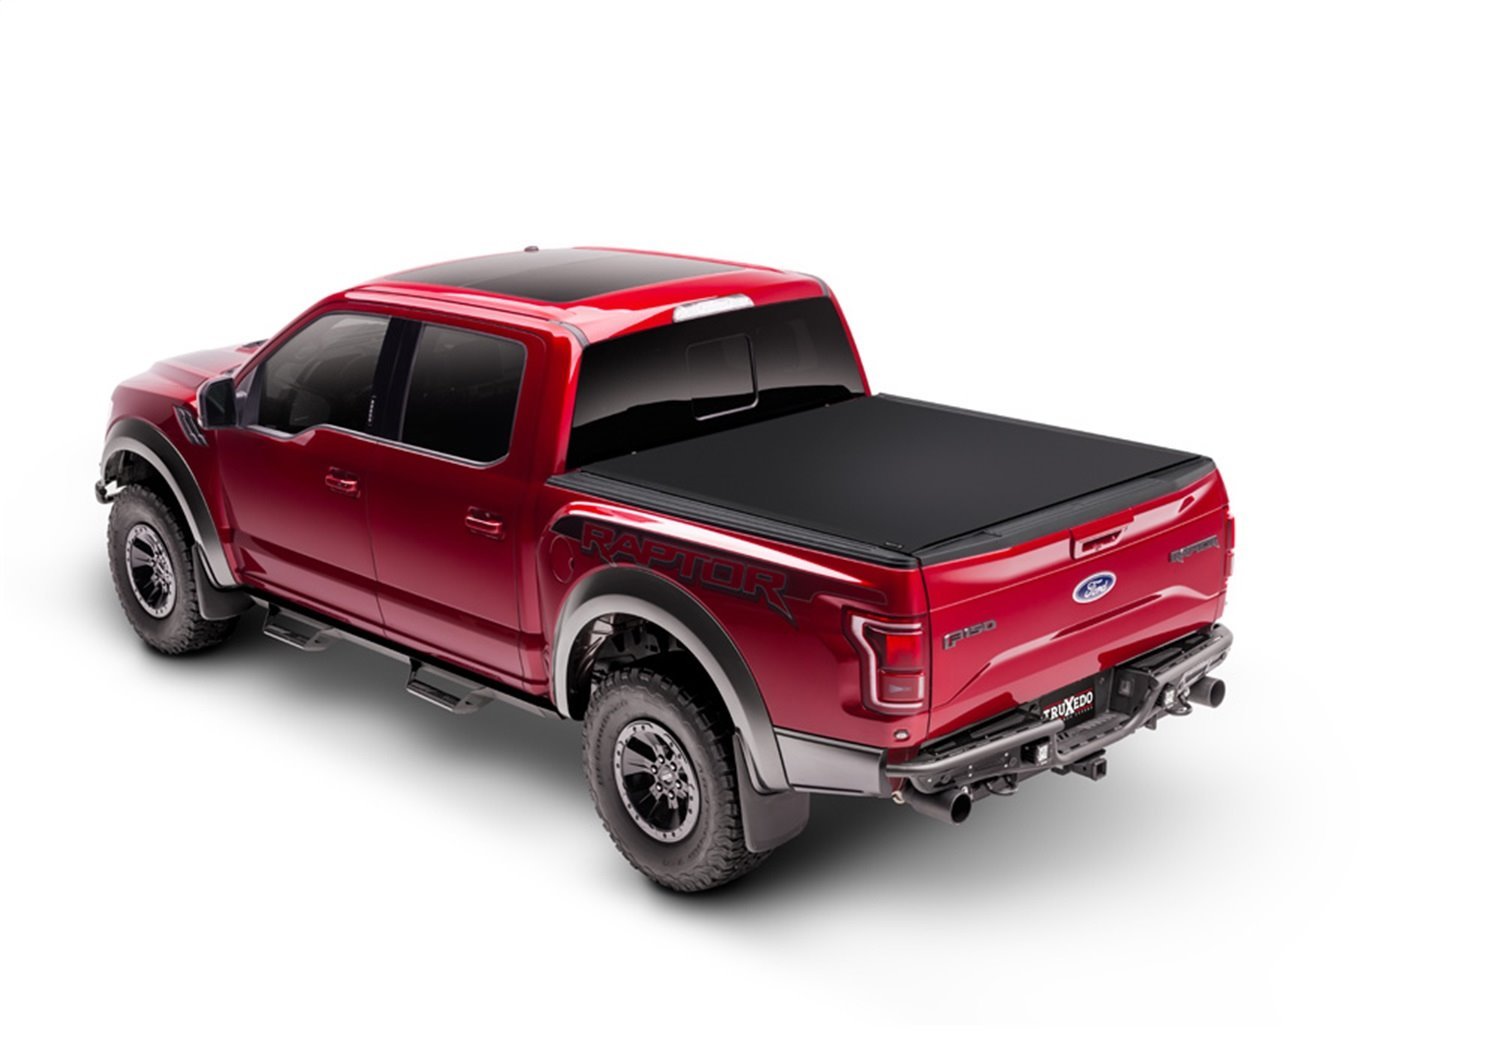 1546816 Sentry CT Hard Roll-Up Tonneau Cover for 2007-2021 Toyota Tundra w/8 ft. 2 in. Bed [Matte Black]